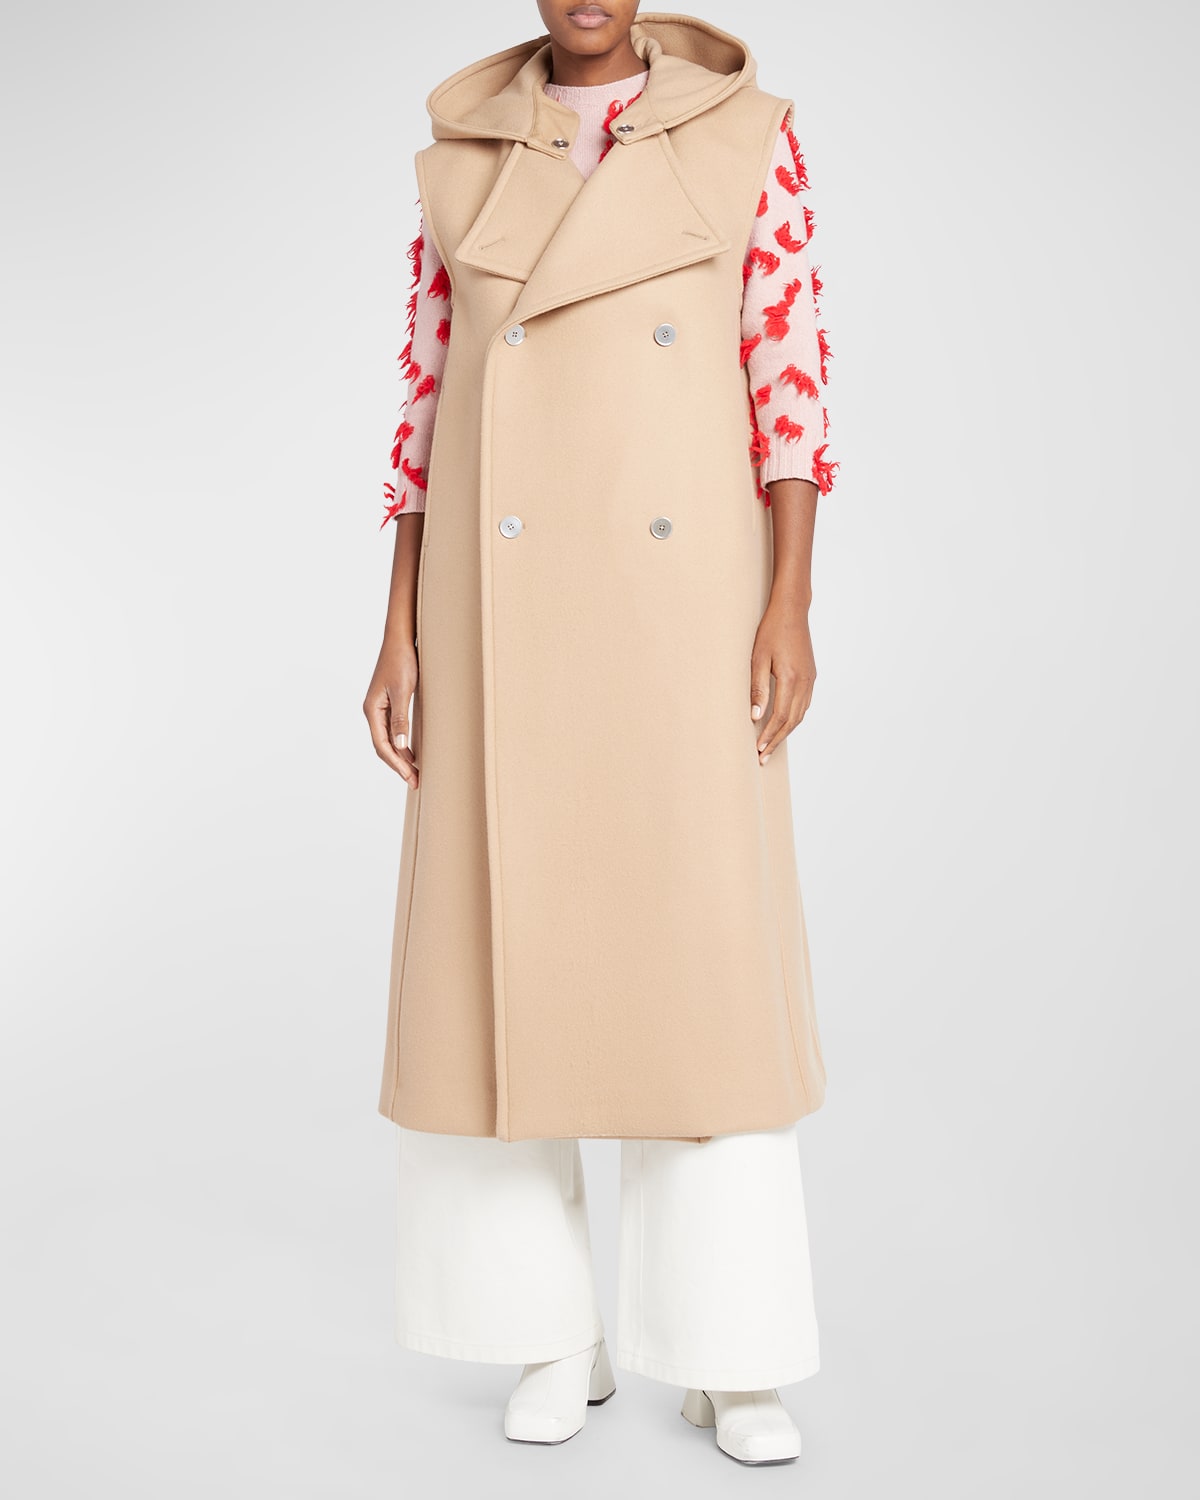 Removable-Hood Sleeveless Double-Breasted Long Coat